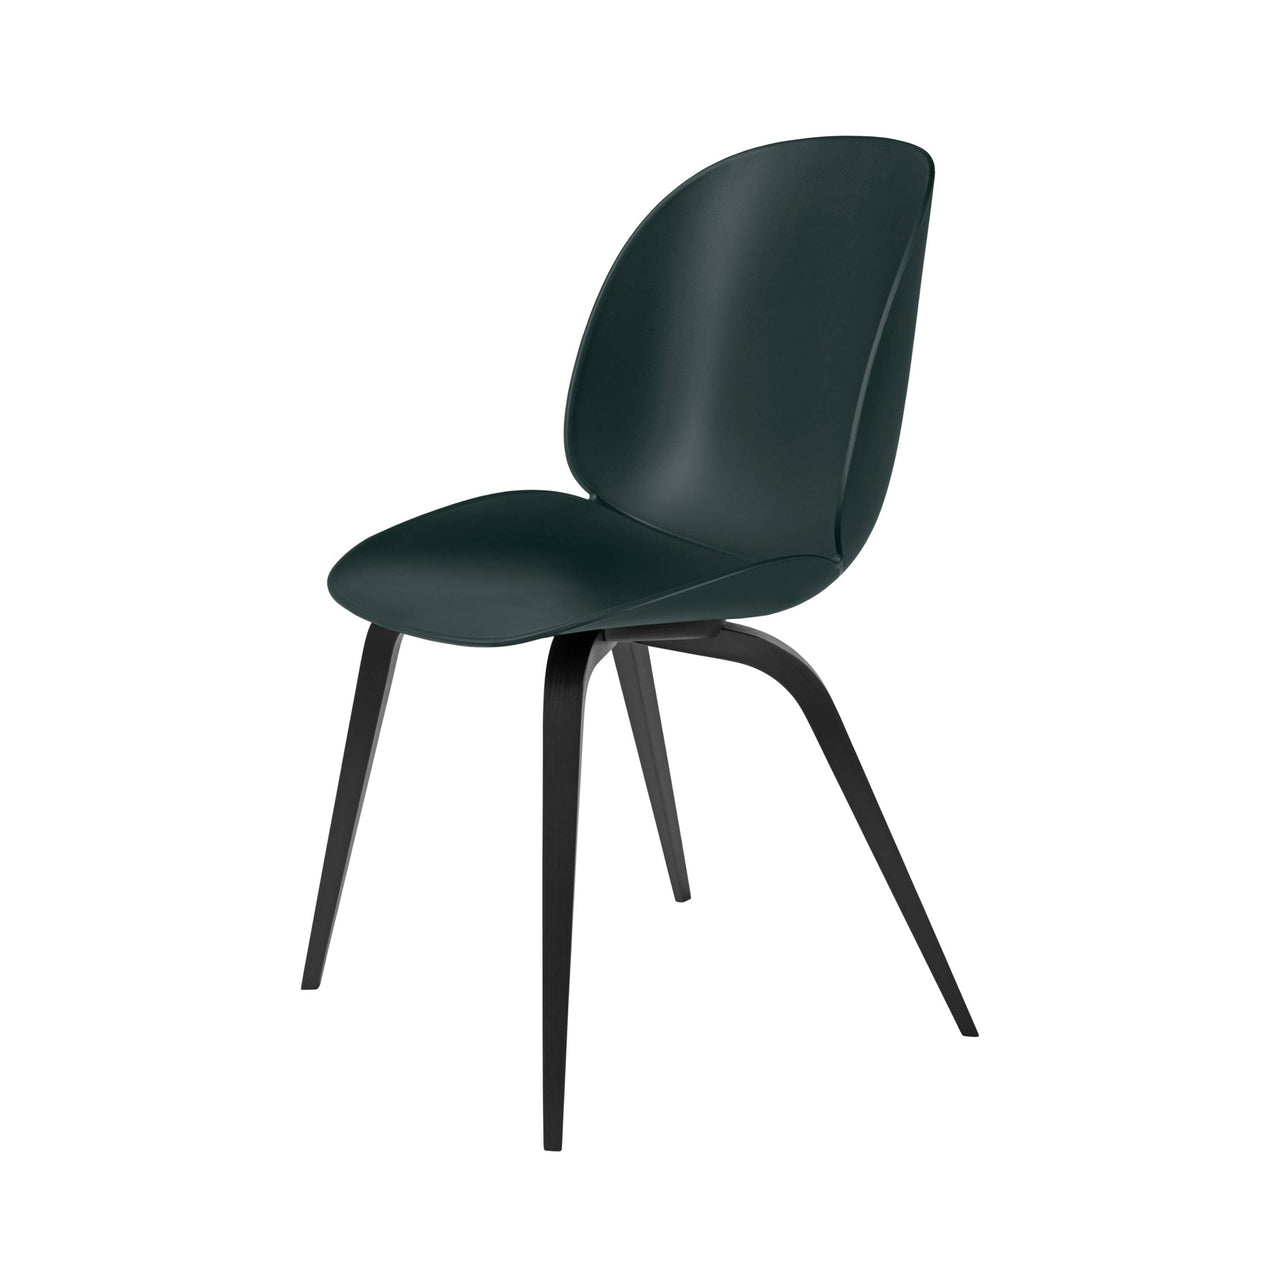 Beetle Dining Chair: Wood Base + Dark Green + Black Stained Beech + Plastic Glides